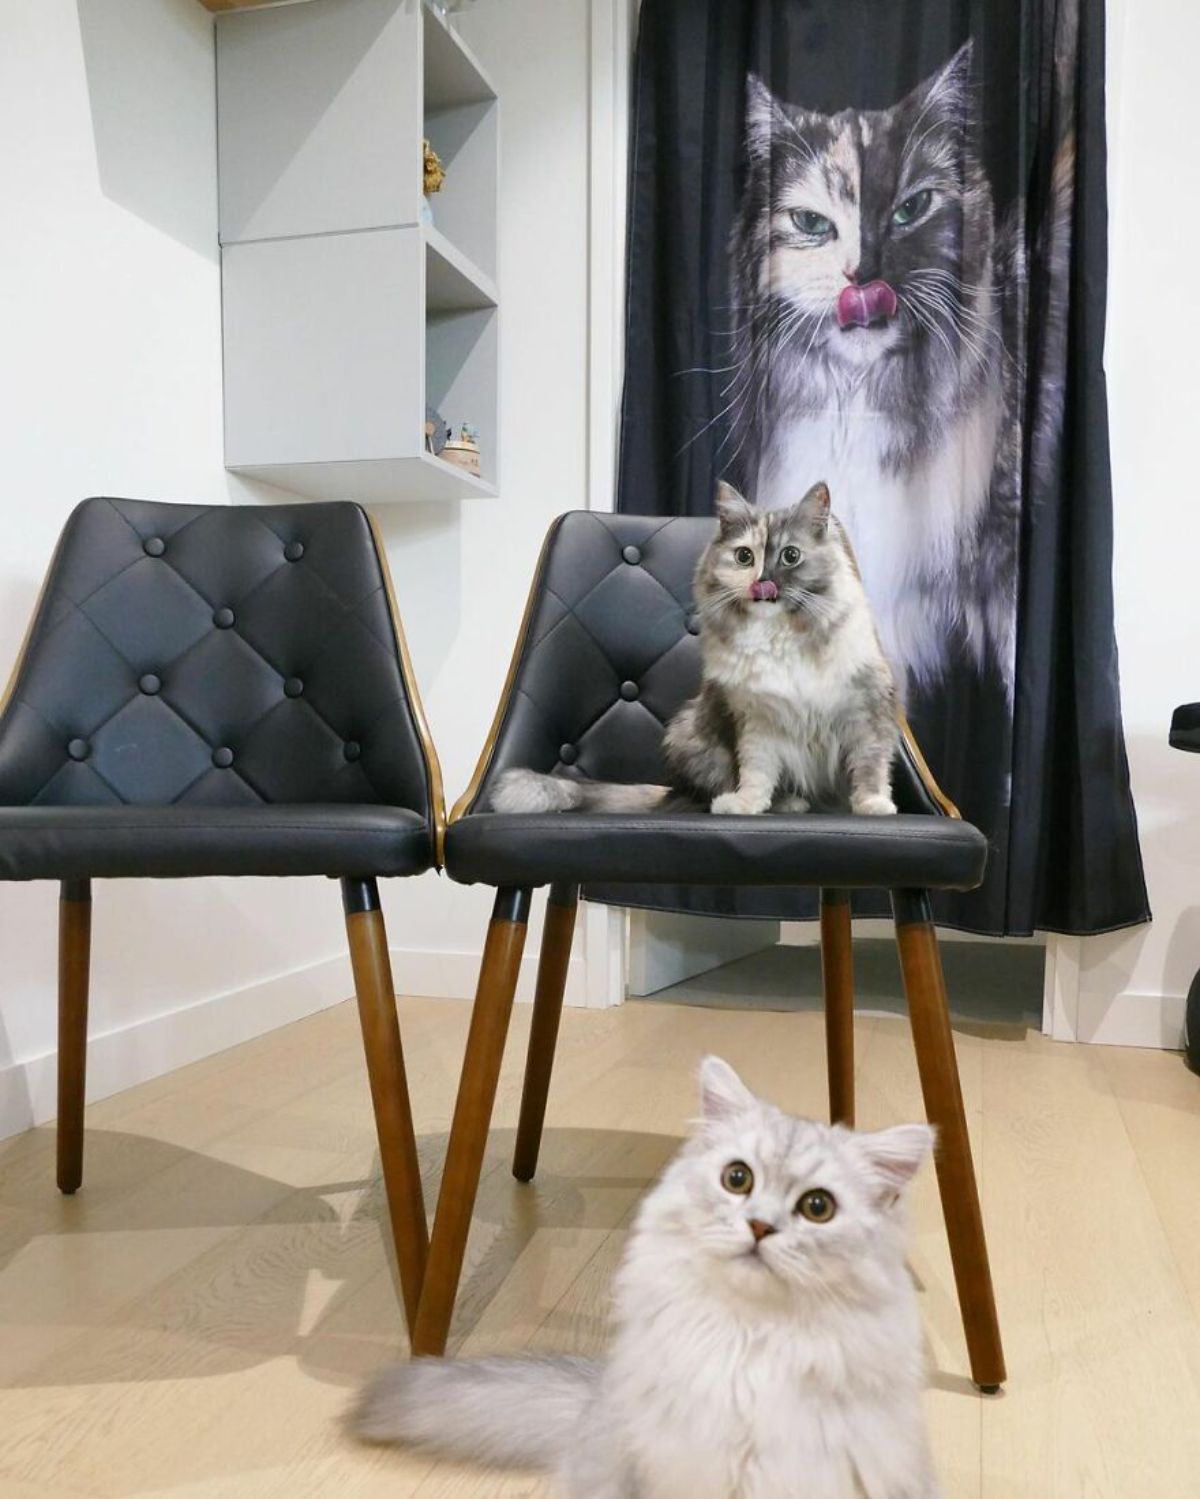 fluffy cat with right side of face being grey and left side being black on a black chair with a curtain of her behind her and a white and grey fluffy cat on the floor